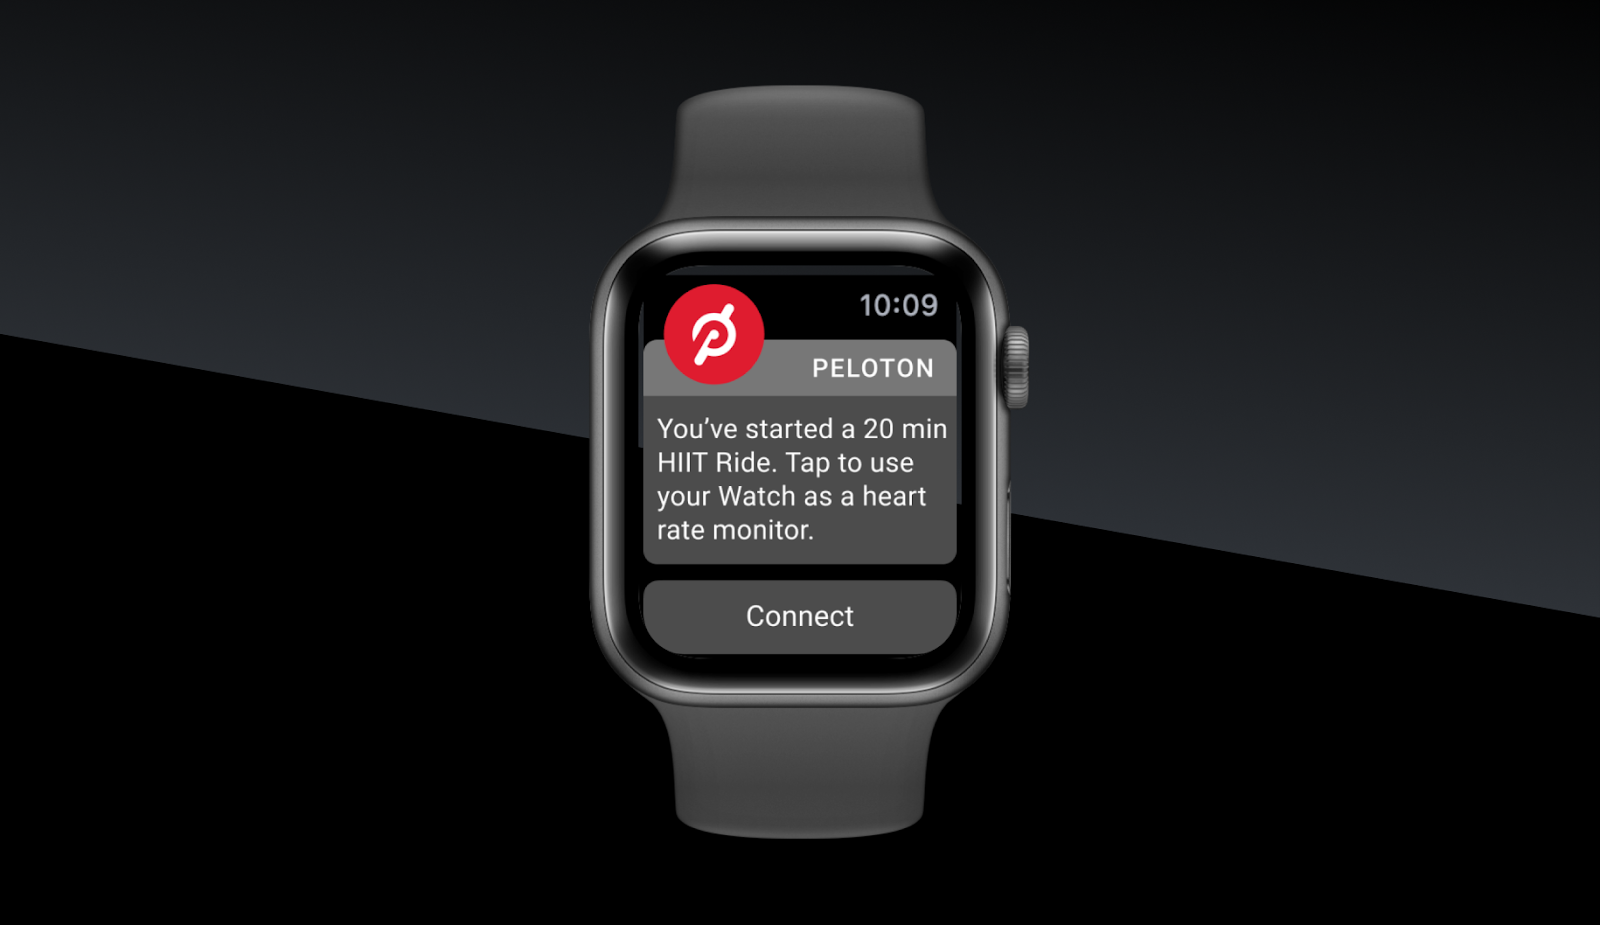 How to pair your Apple Watch to the Peloton App?